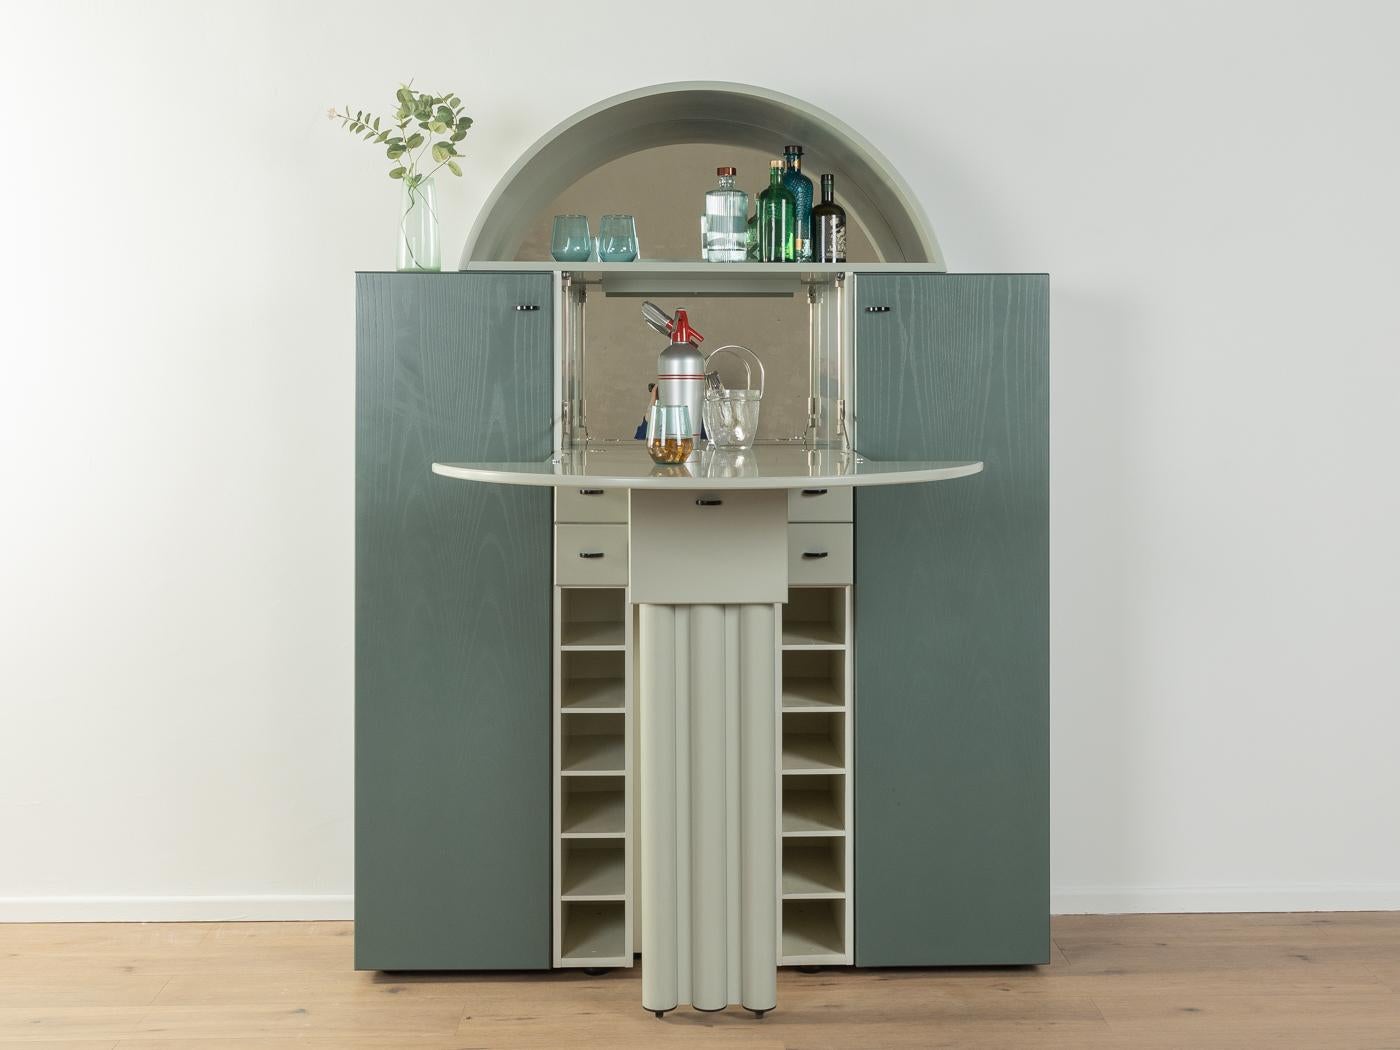 Postmodern three-part bar cabinet by Peter Maly for the Duo-series from Interlübke from the 1980s. Corpus consisting of two side cabinets in petrol stained ash veneer and a grey bar element in the middle with two doors, a folding door, two mirrors,